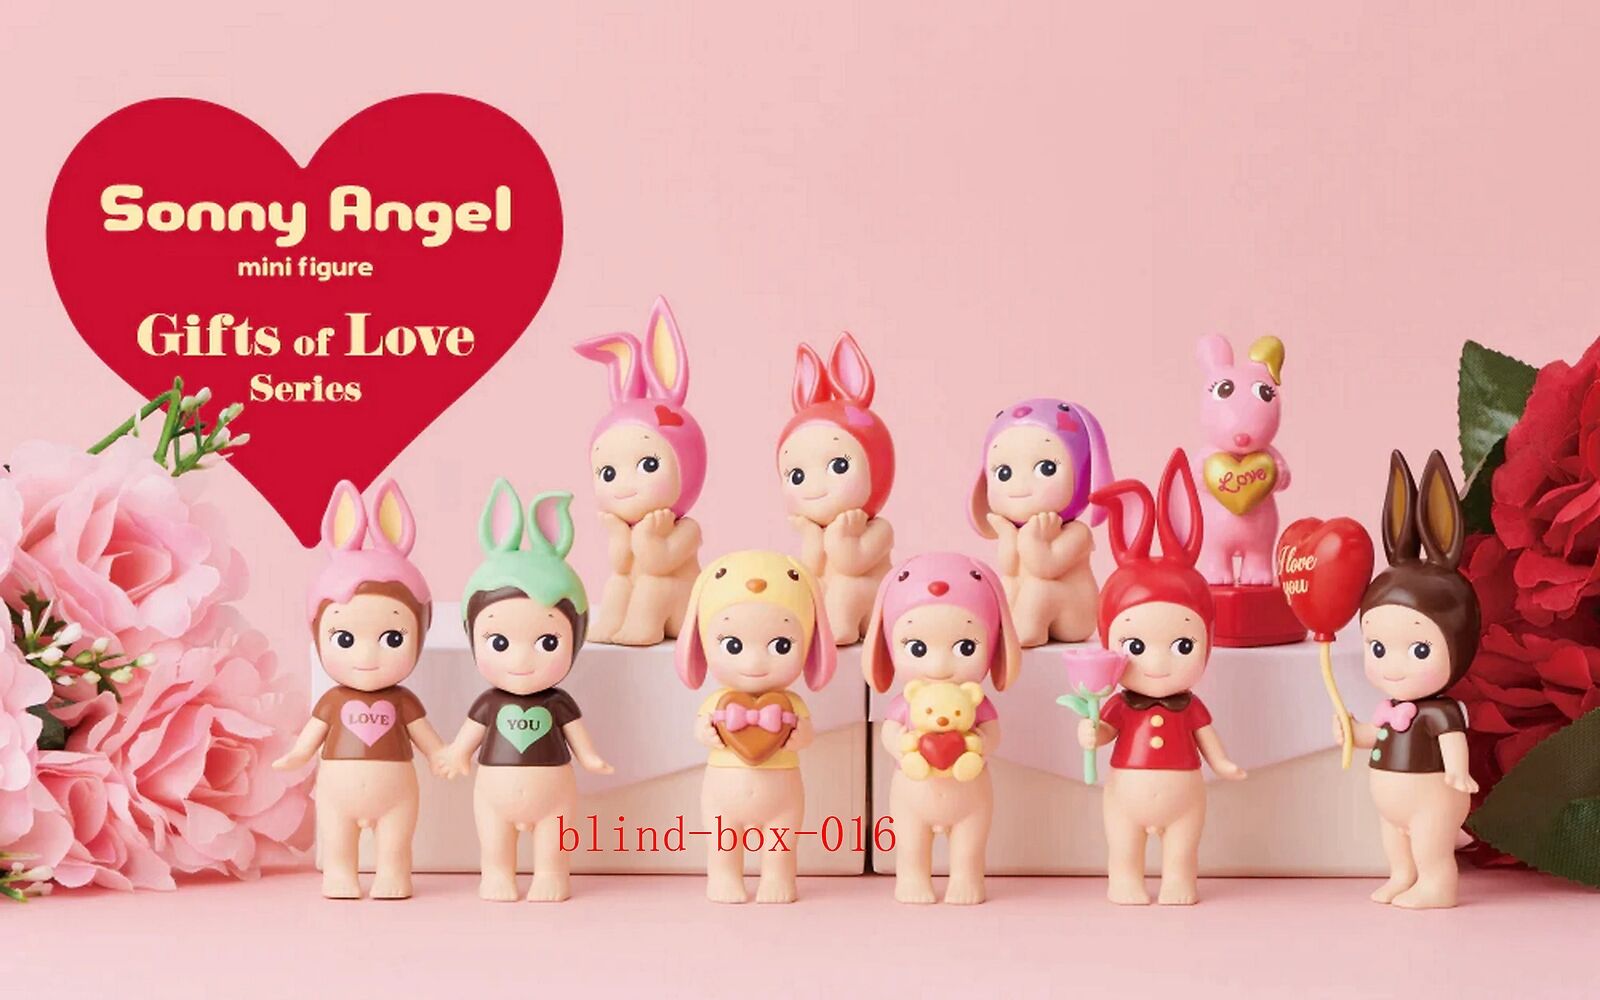 Authentic Sonny Angel Gifts Of Love Series  (6 Blind Box Figure)  One Set Toy！